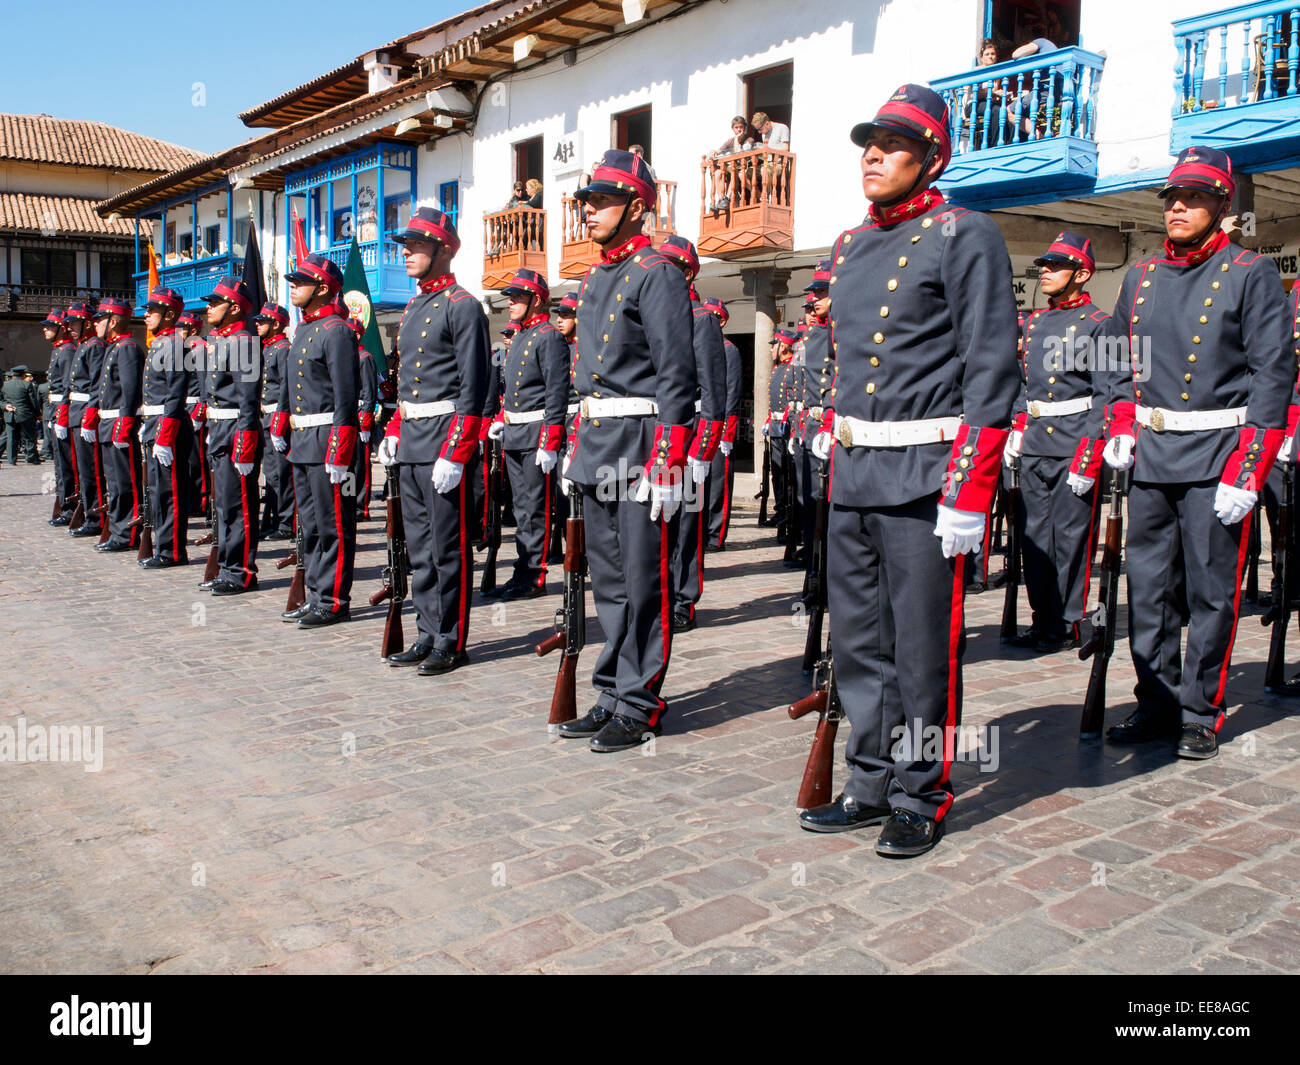 Soldiers in parade at the Cusco Week festivites, held each year in June leading up to the Inti Raymi festival - Cusco, Peru Stock Photo